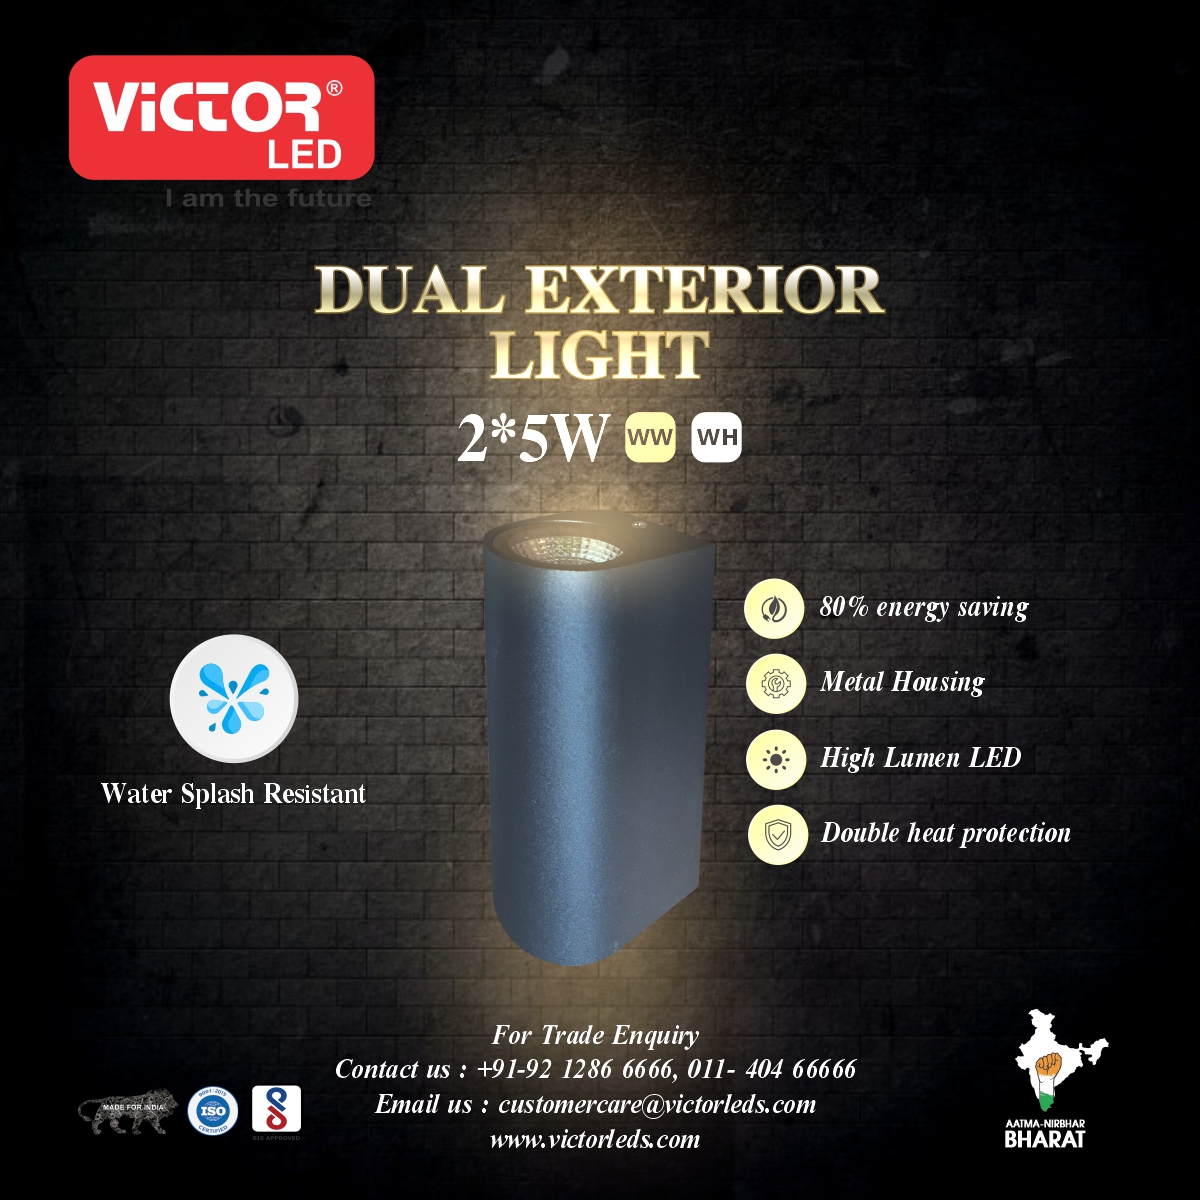 DUAL EXTERIOR LIGHT - 2*5 WATT 
.
.
Available in WH/WW
.
.
#light #led #dual #exteriorlight #sale #bestlight #manufacture #followforfollowback #follow4followback #followers #f4follow #f2follow #followforfollowback